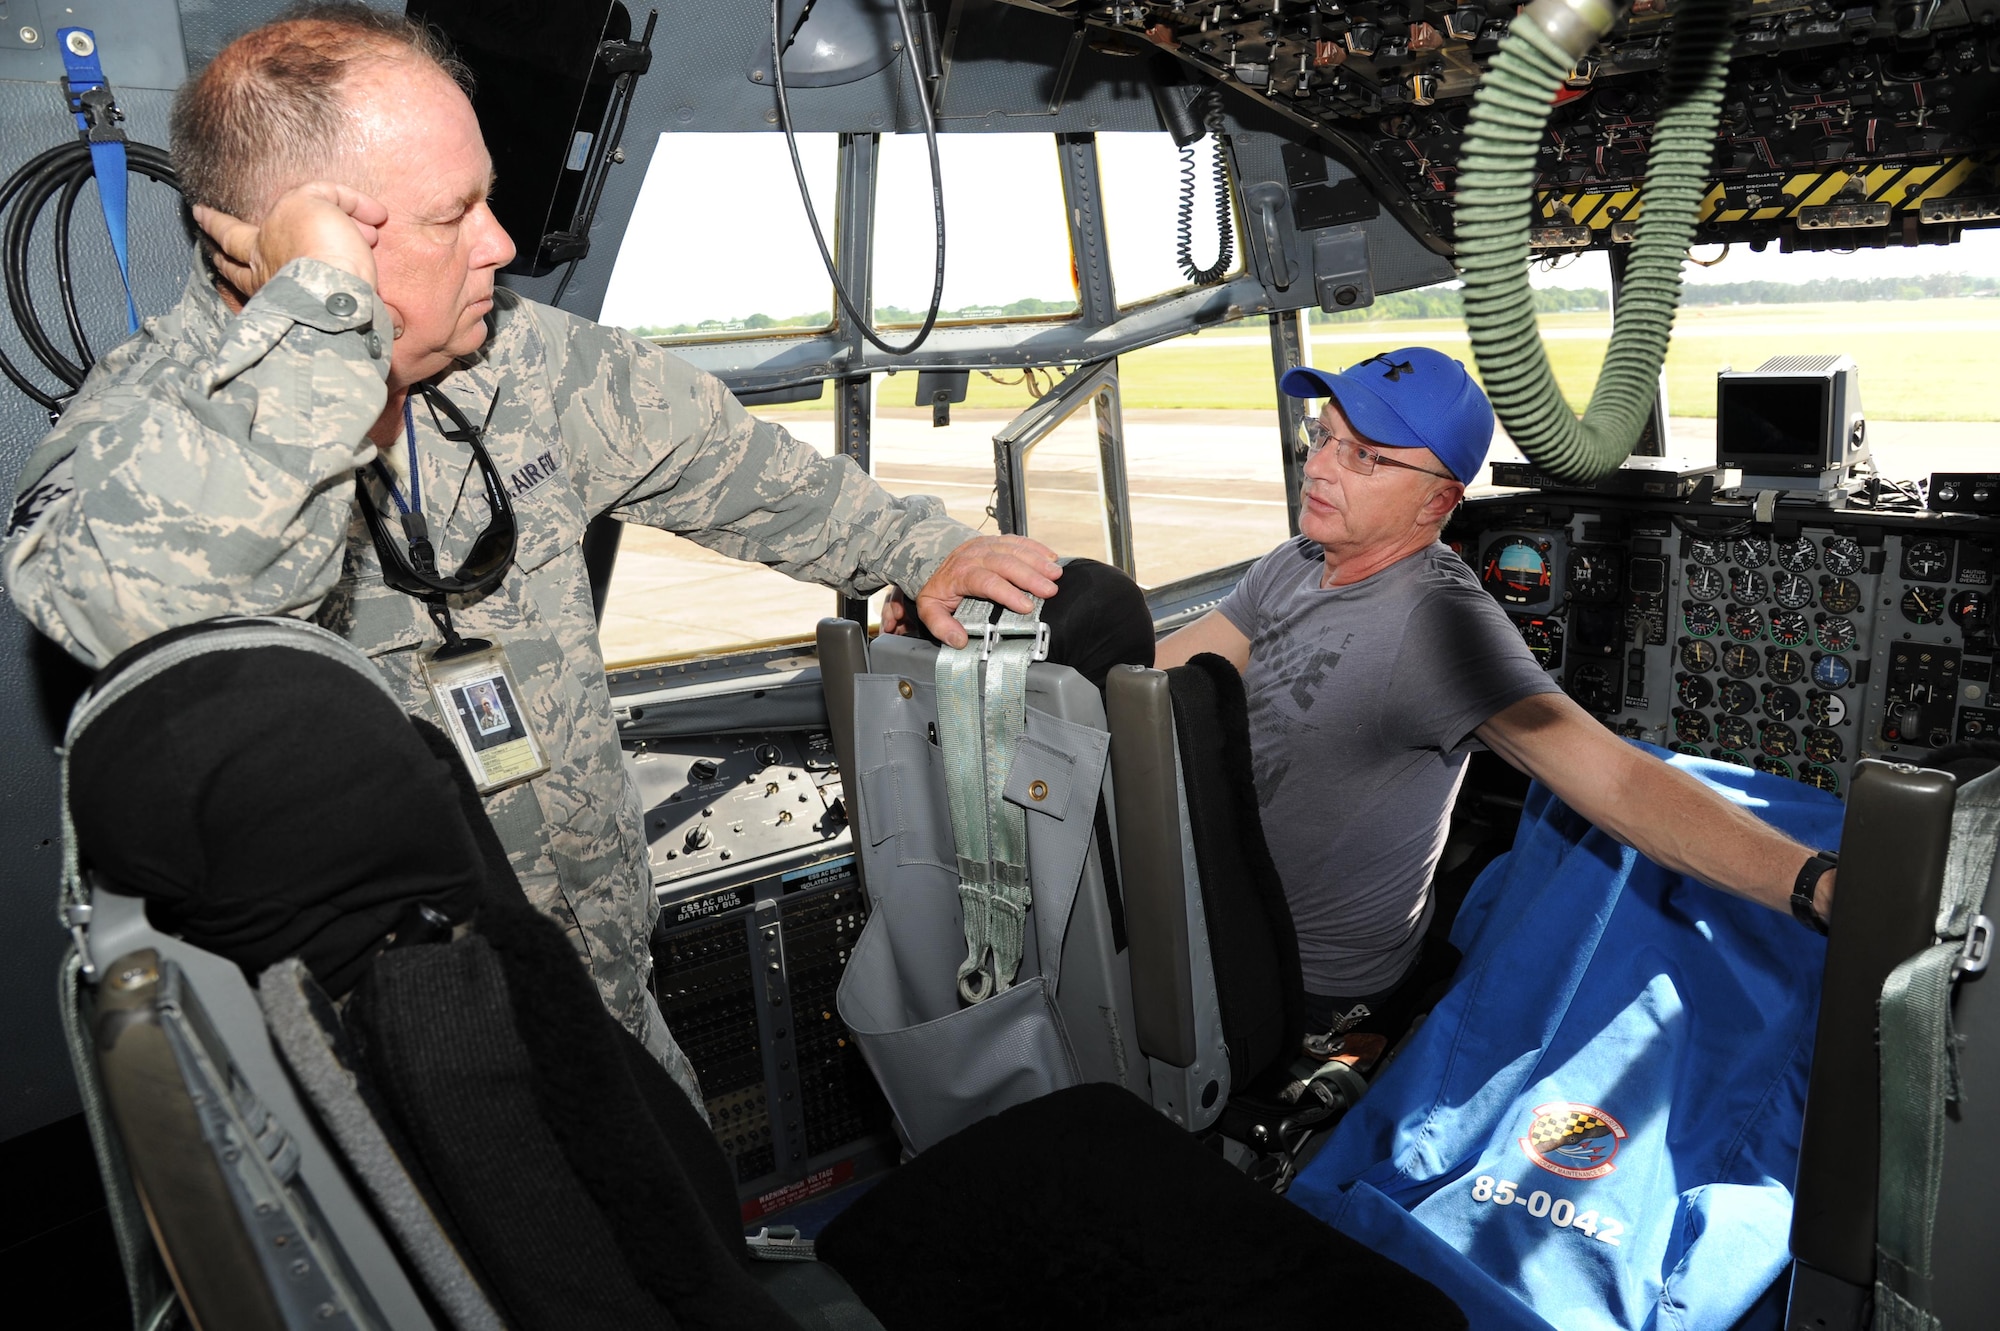 Mark Herndon, former drummer for the band Alabama, talks to Master Sgt. Tom Duke, crew chief, 908th Air Maintenance Squadron, during a flightline tour of a C-130 Hercules from the 908th Airlift Wing, Maxwell Air Force Base, Ala. Hendron, who flies commercial jets out of Birmingham, Ala., talks to Duke about the C-130's flight capabilities while sitting in the pilot's seat in the aircraft's cockpit.